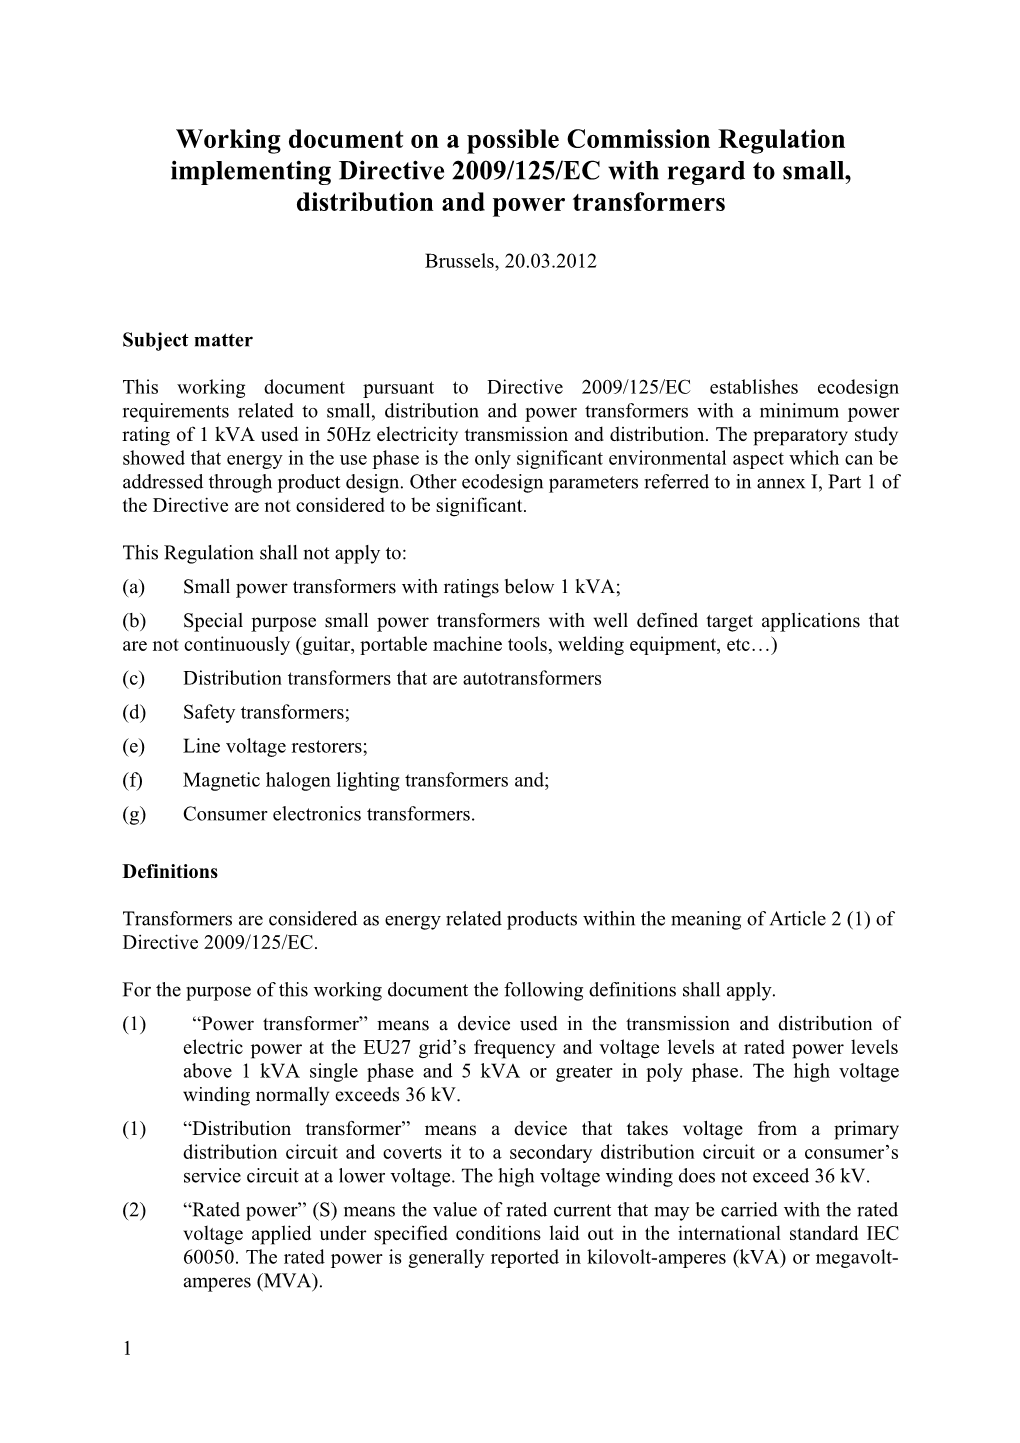 Working Document on a Possible Commission Regulation Implementing Directive 2009/125/EC